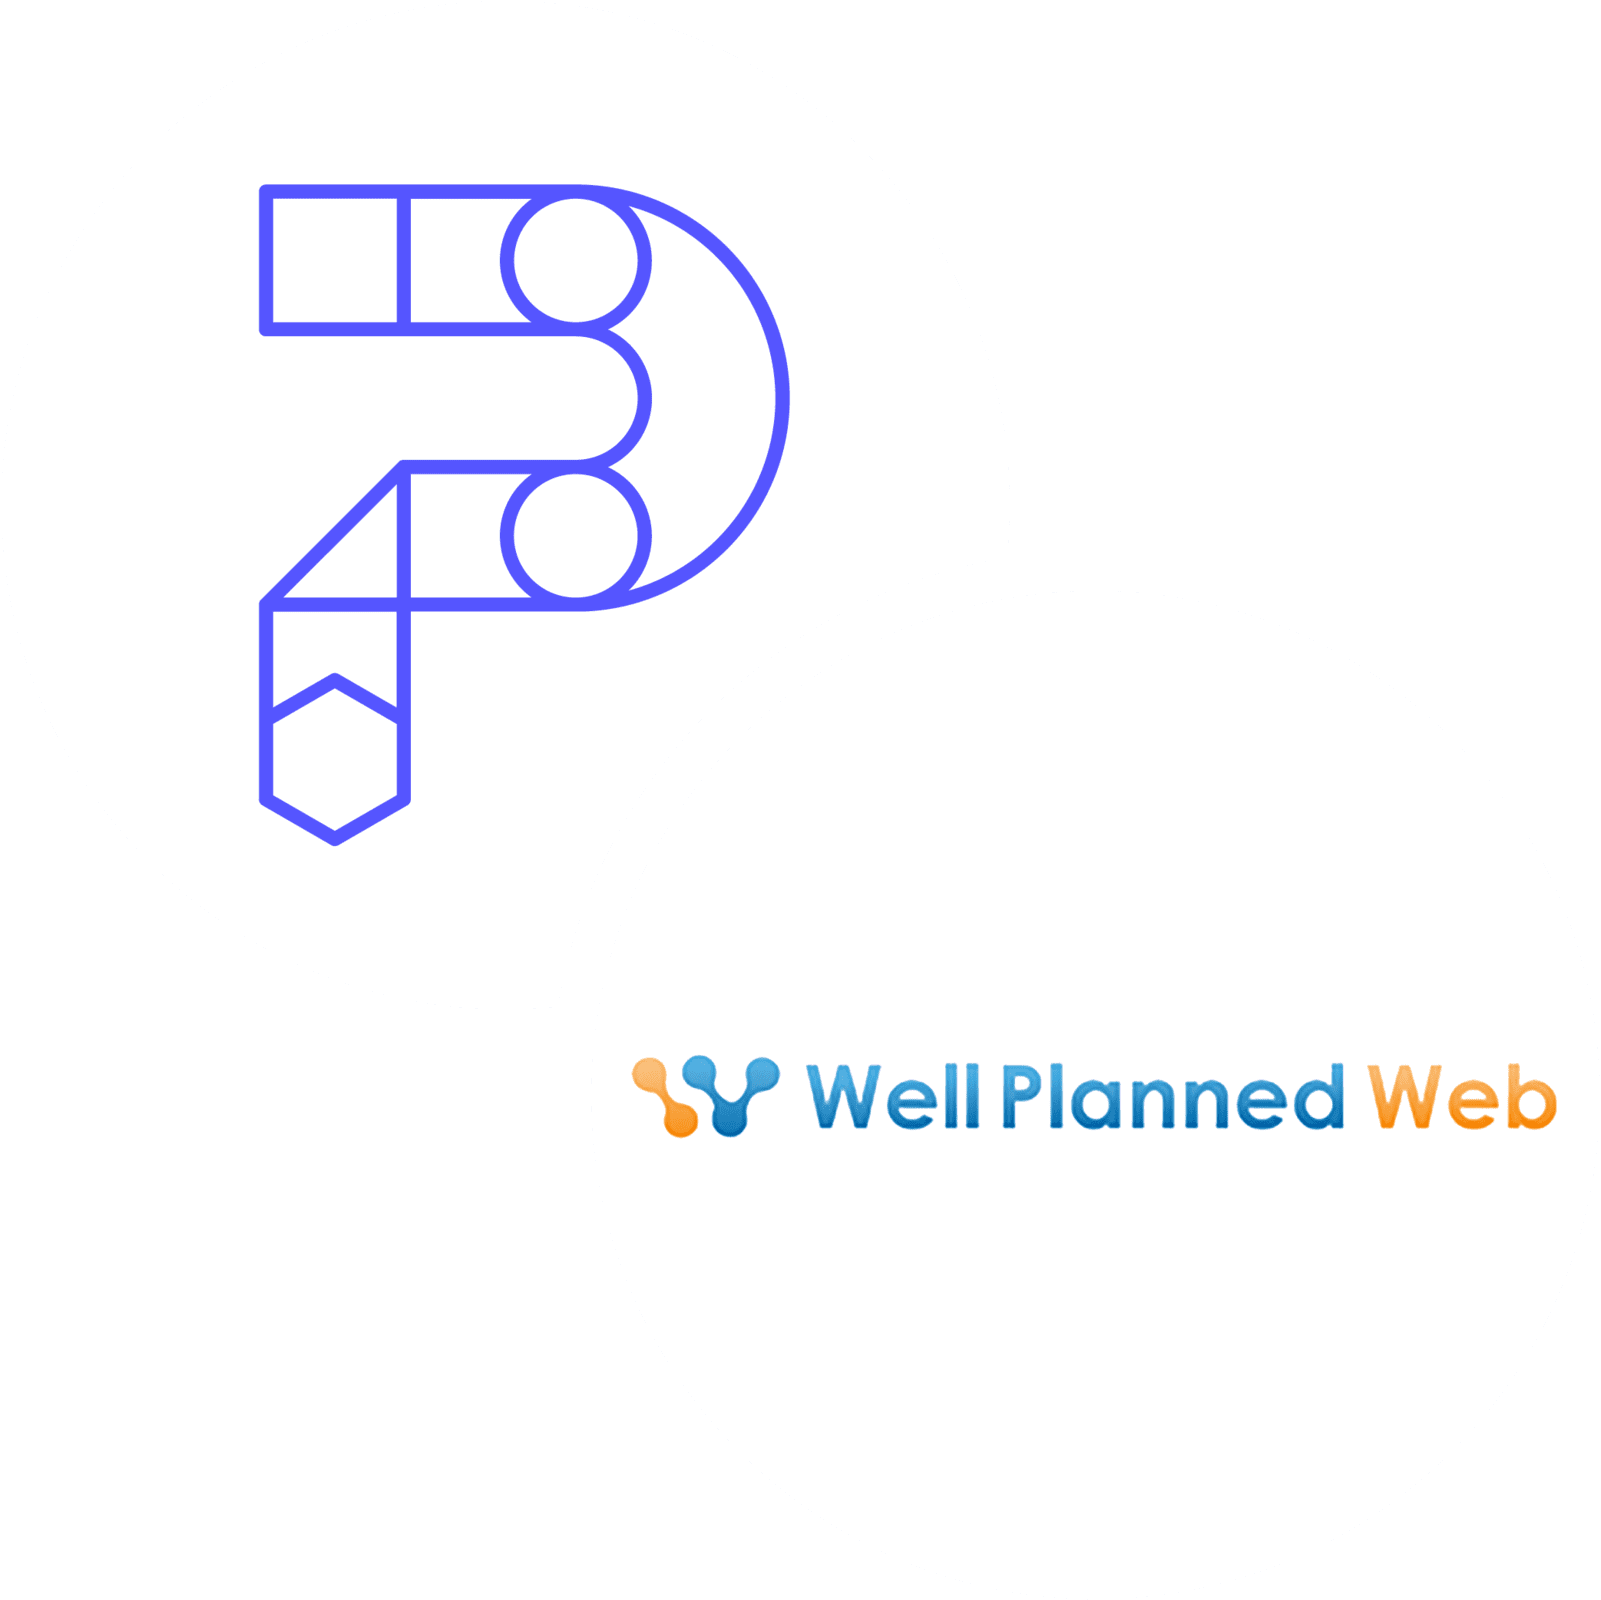 Well Planned Web and PathFactory logo lock up